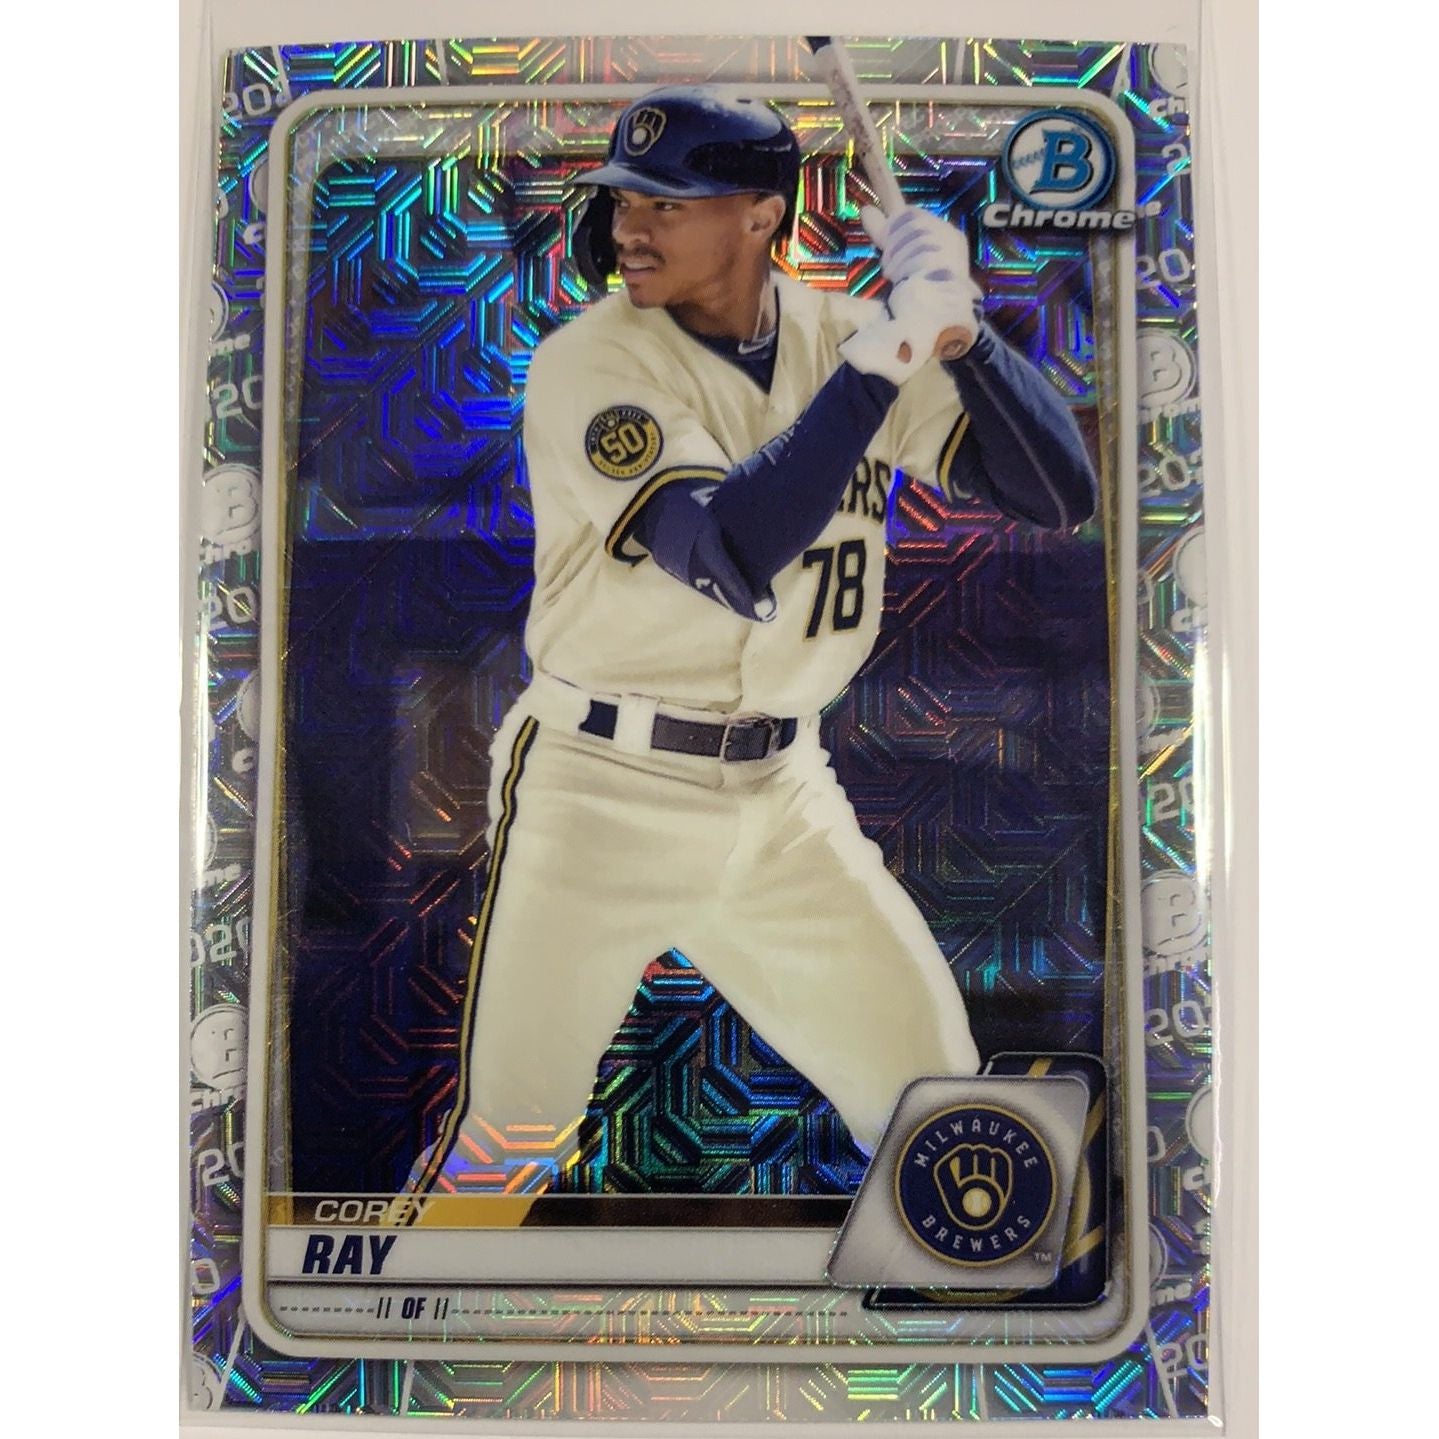  2020 Bowman Chrome Corey Ray Mojo Refractor  Local Legends Cards & Collectibles